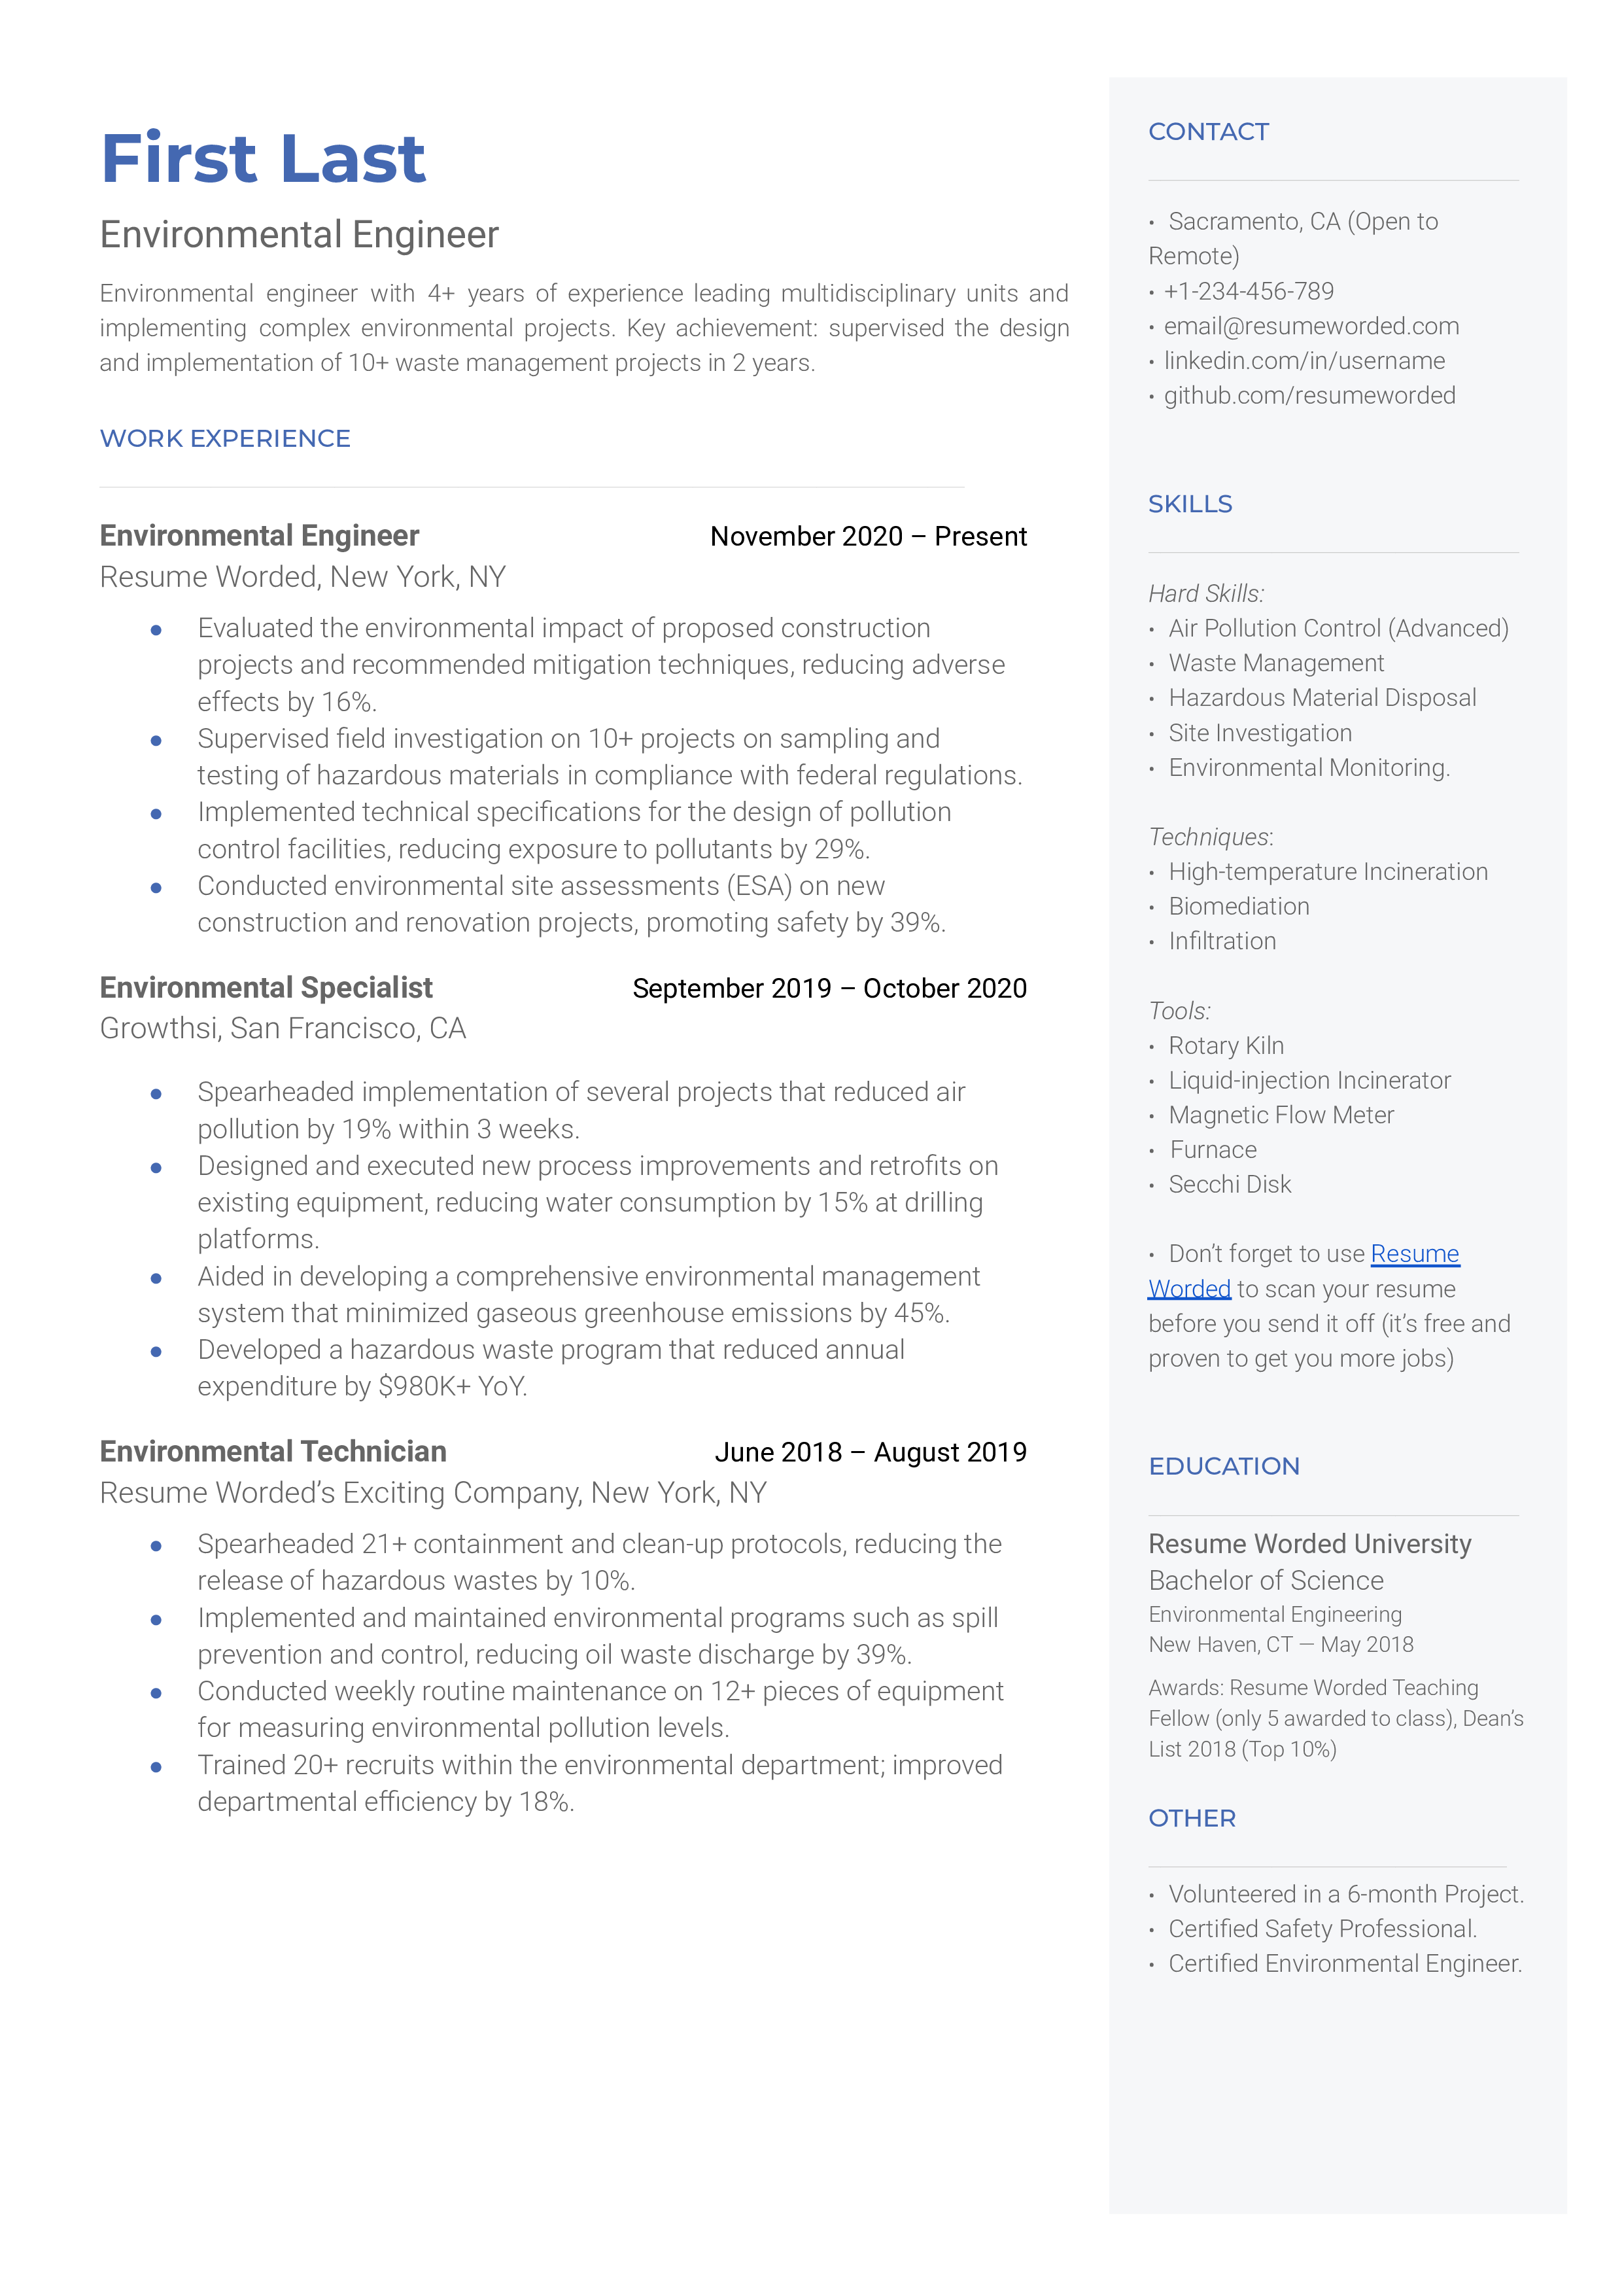 A CV screenshot for an Environmental Engineer position, highlighting technical skills and project experiences.